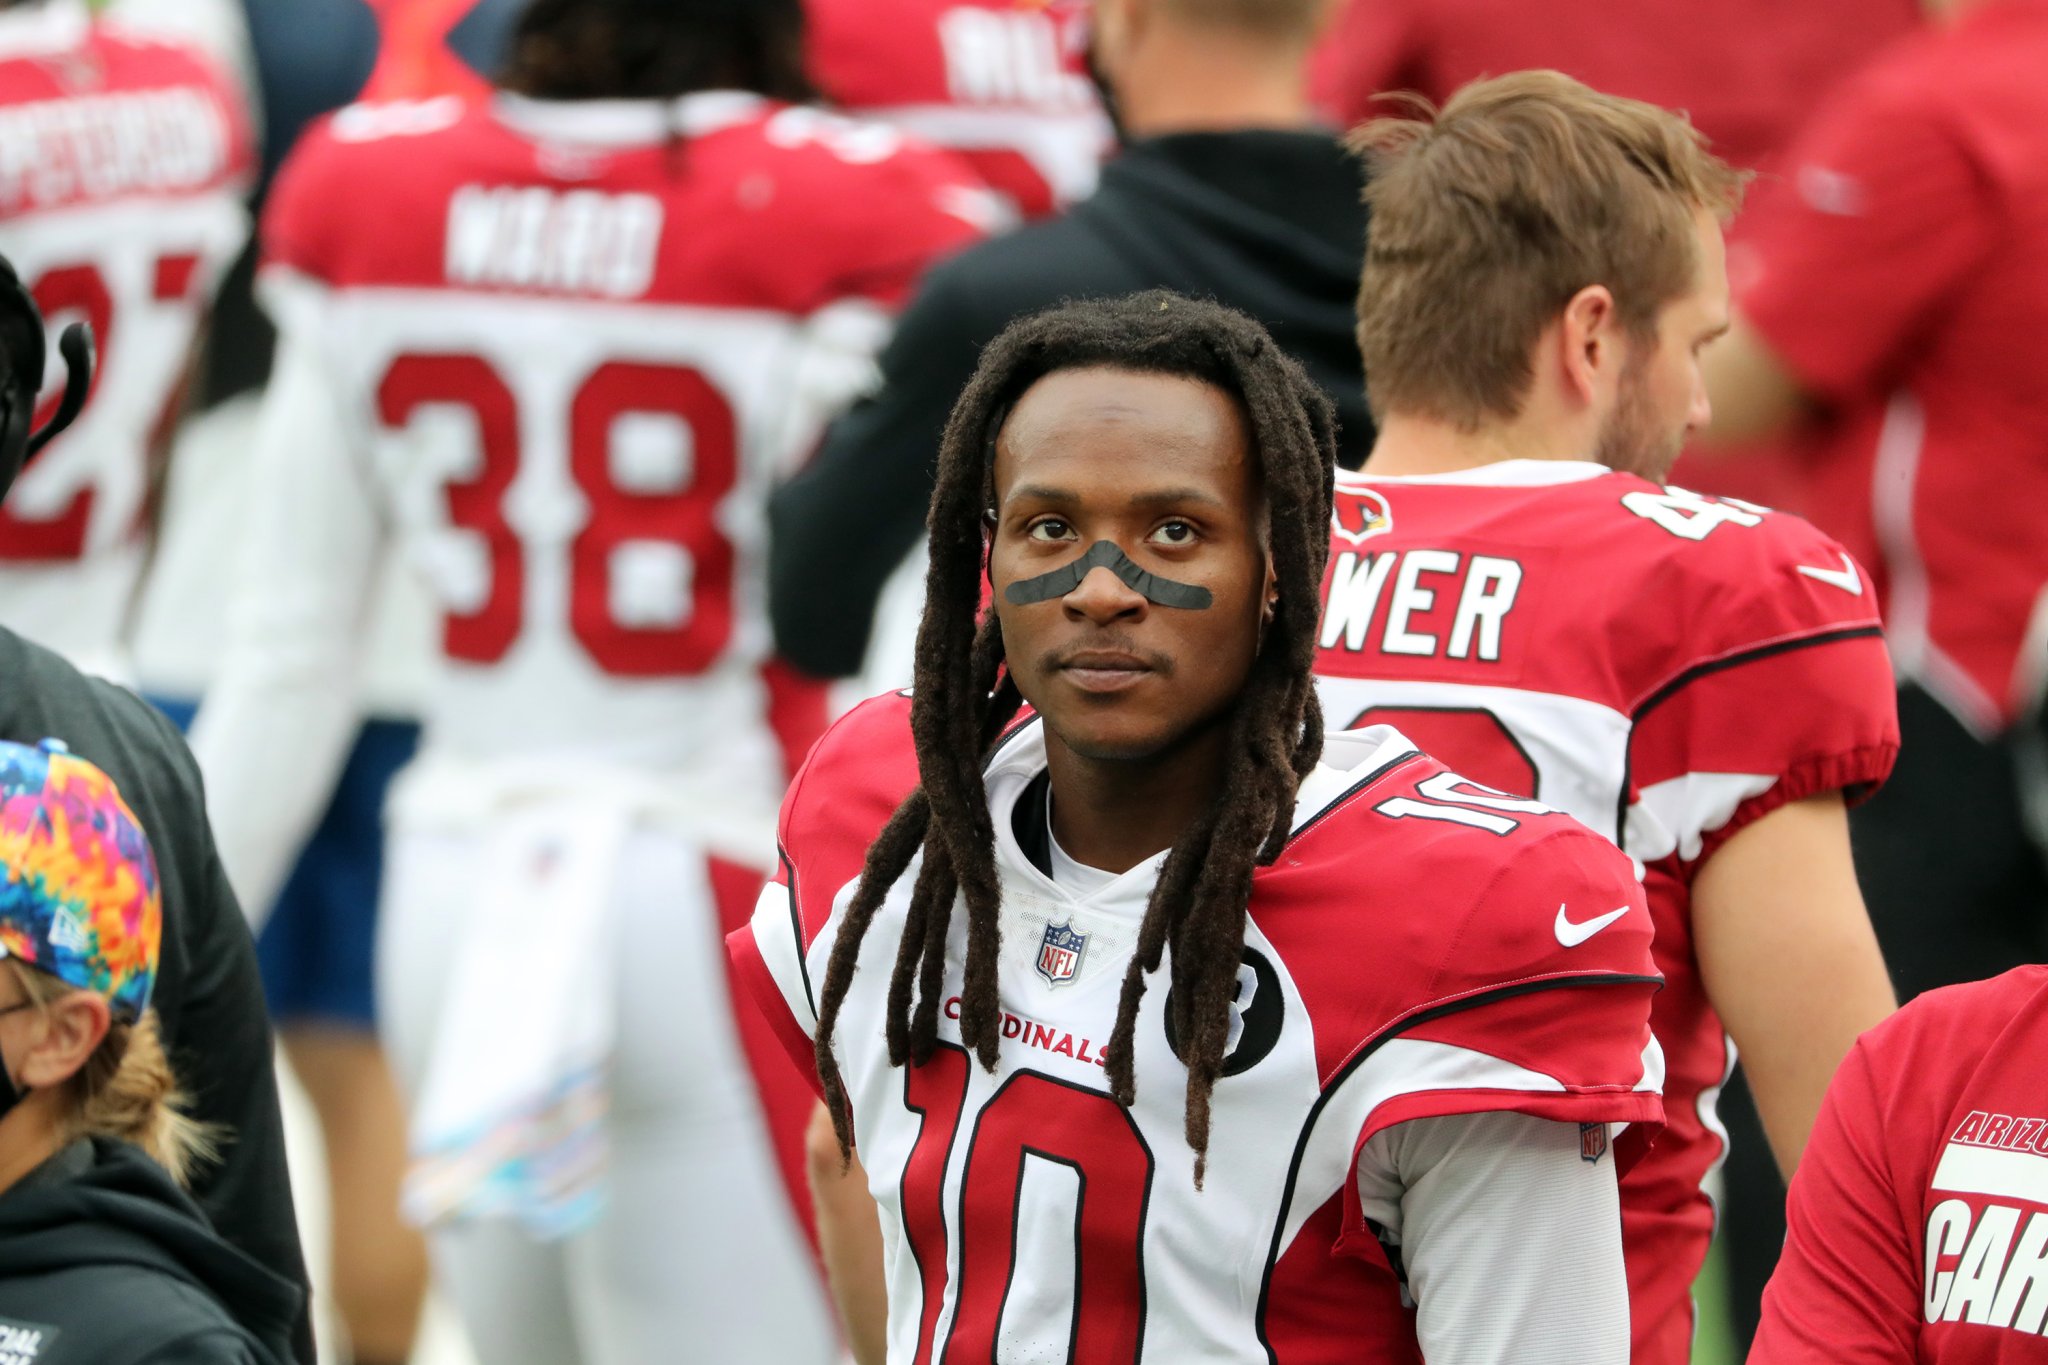 DeAndre Hopkins Photographed Flipping Off Trump Supporters At Parade Before Game